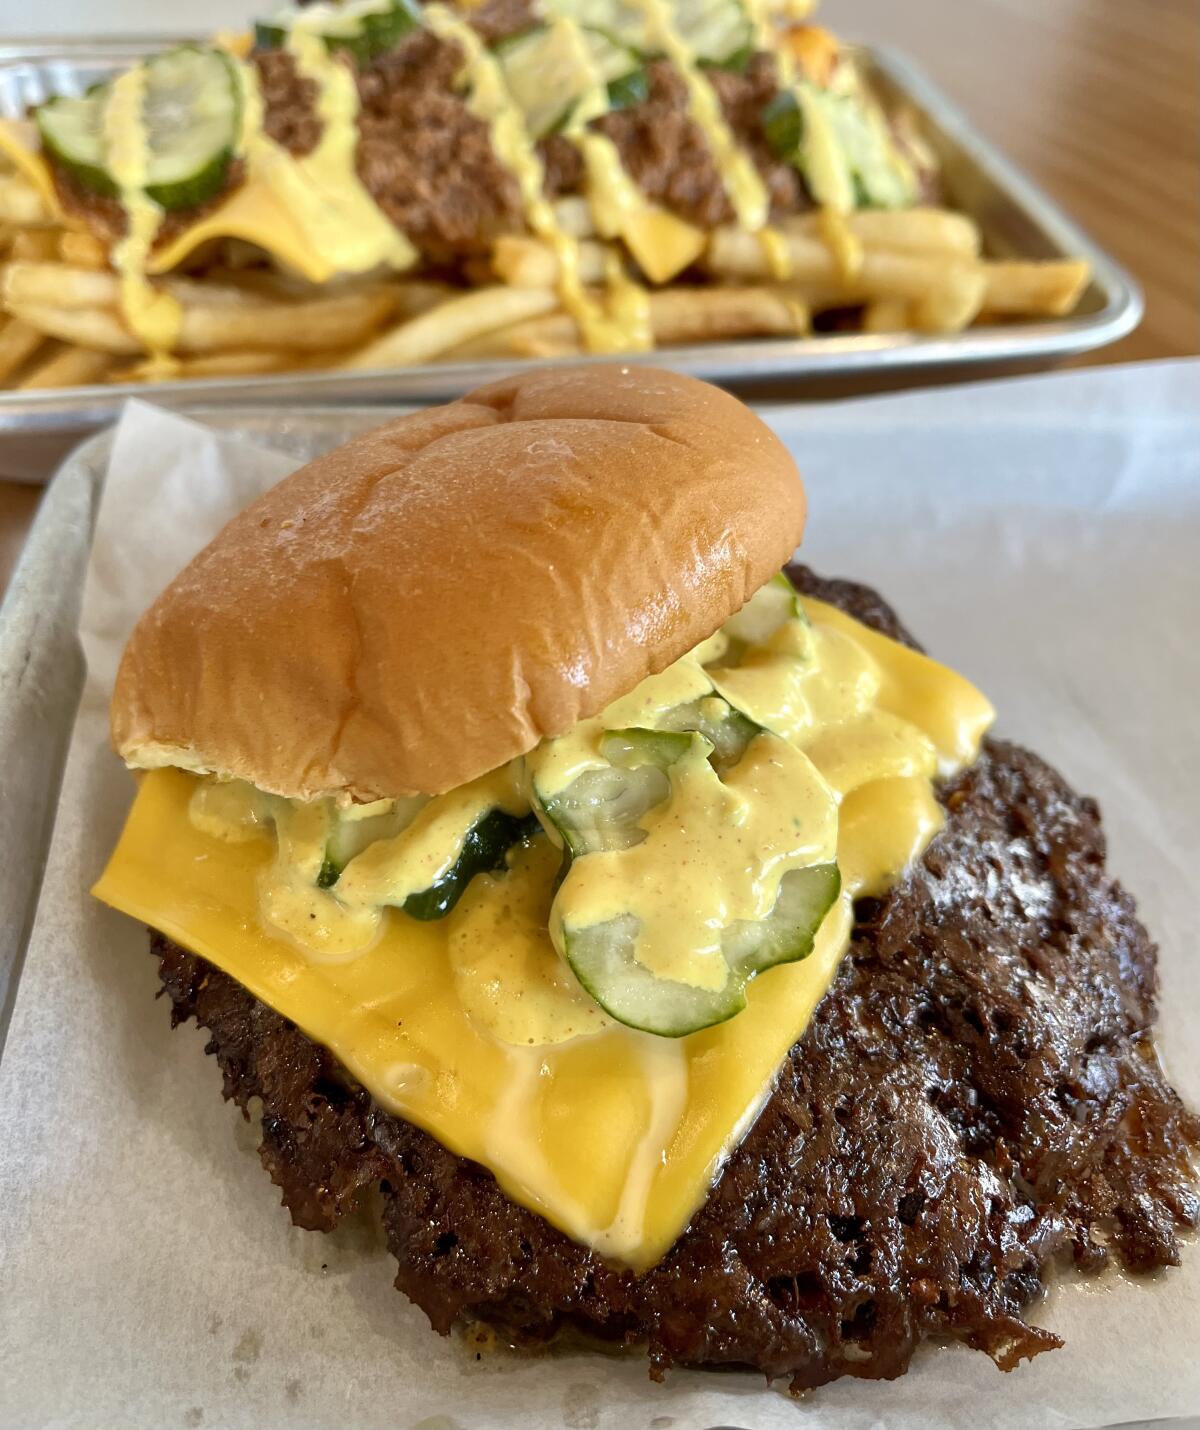 The Classic Hammer Burger is a smash burger.